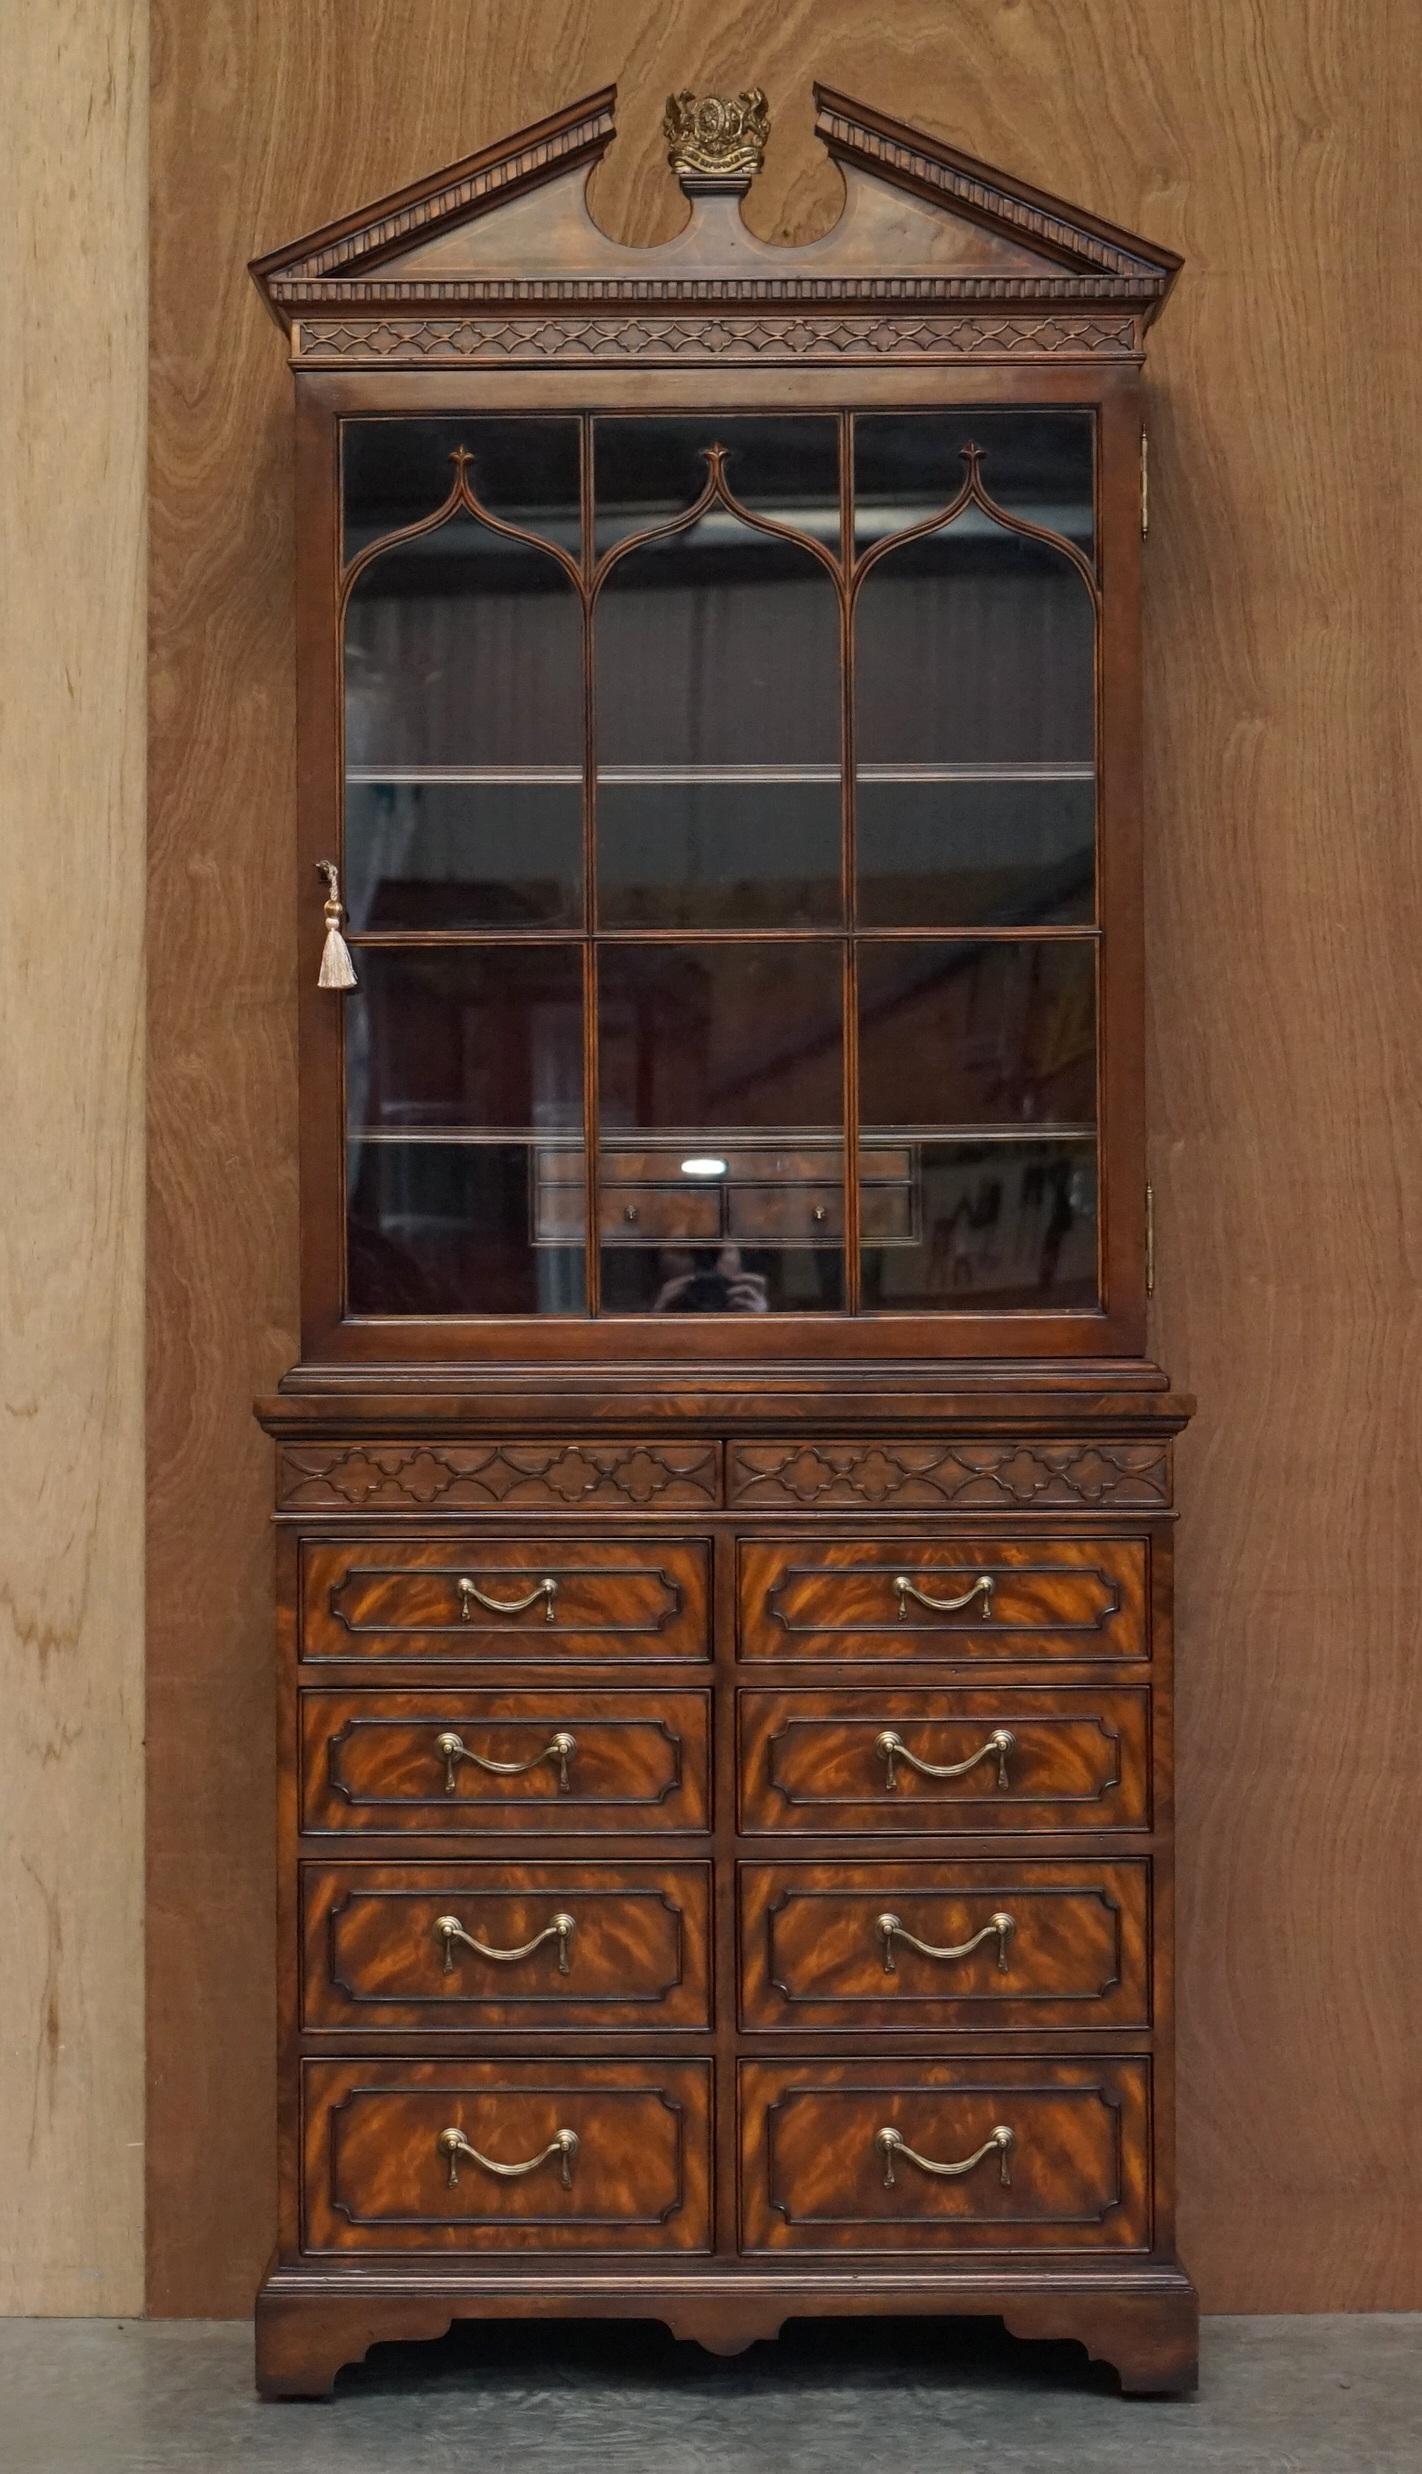 We are delighted to offer for sale this very rare, now discontinued, Thomas Chippendale Library bookcase which is an exact authorised copy of one from Princess’s Diana’s family home, the Althorp Estate, it was part of the Living History collection,